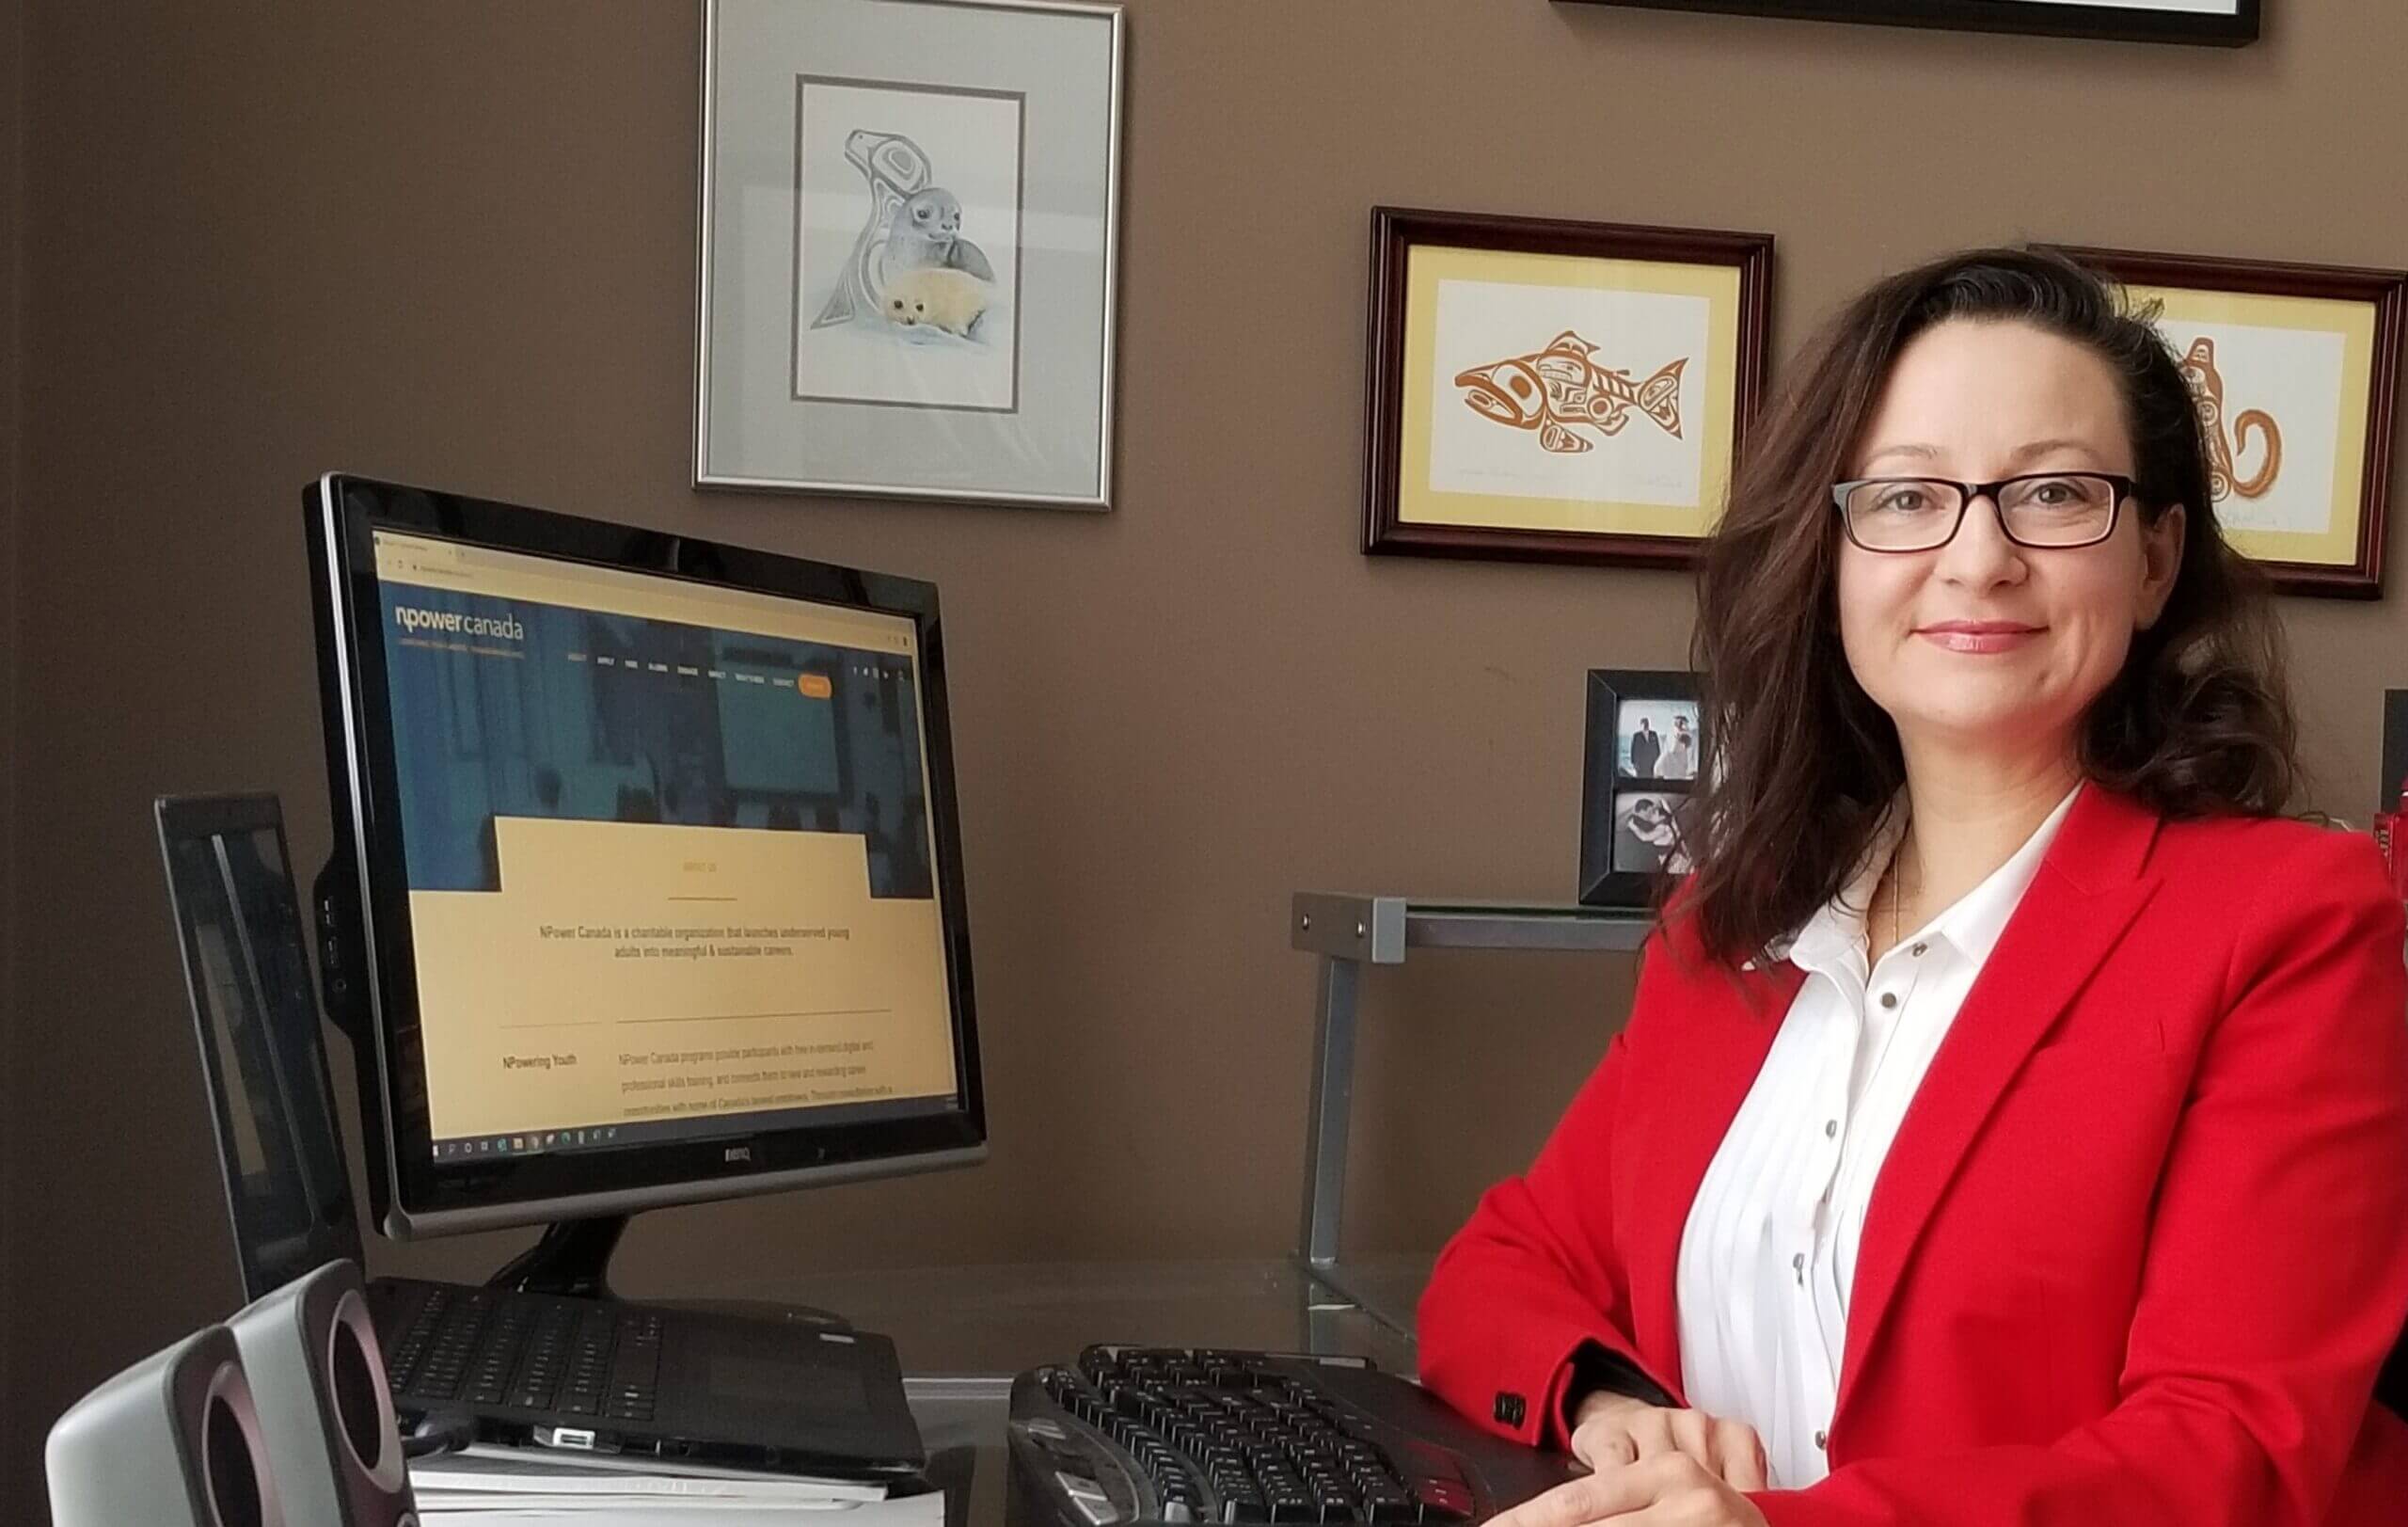 Image of Diana Parks, Halifax’s regional director for NPower Canada, in her office